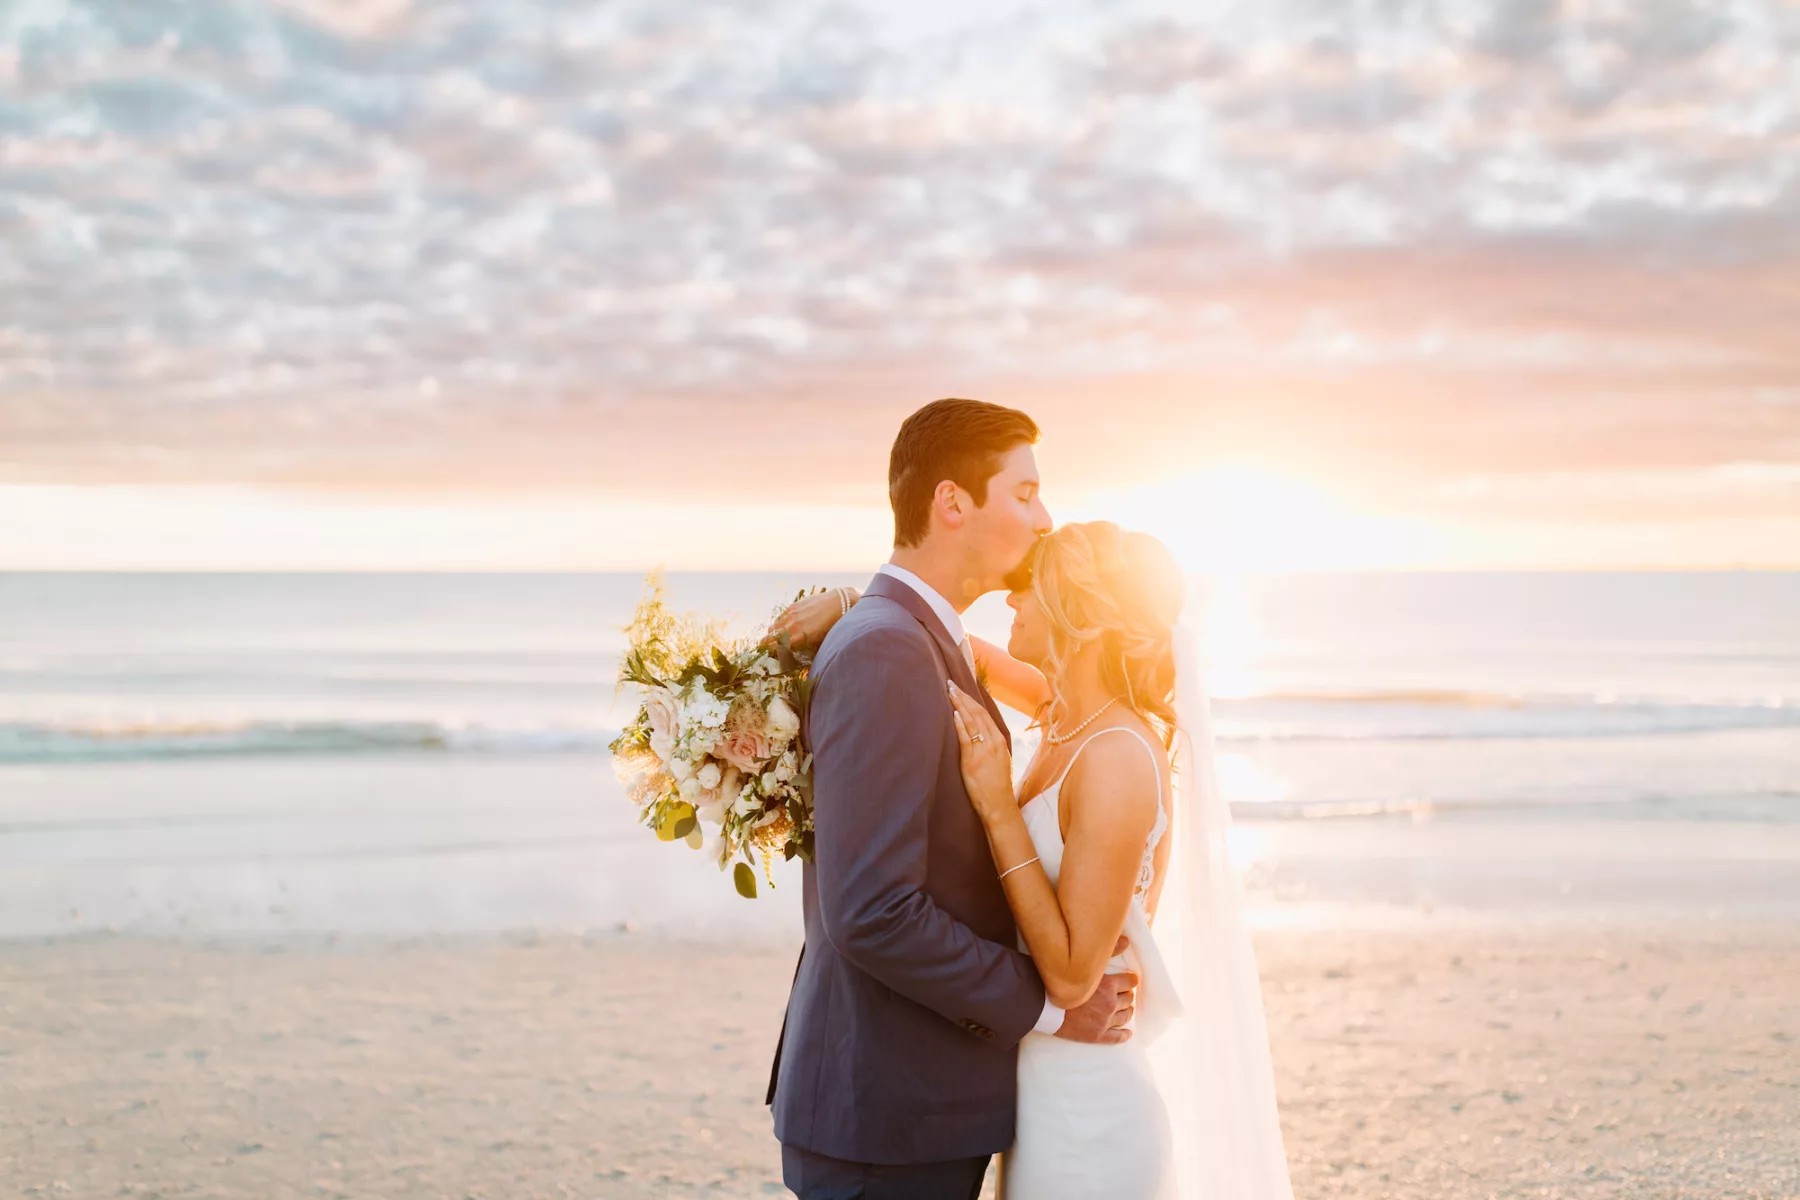 Dusty Blue and Green Florida Destination Wedding | The West Events